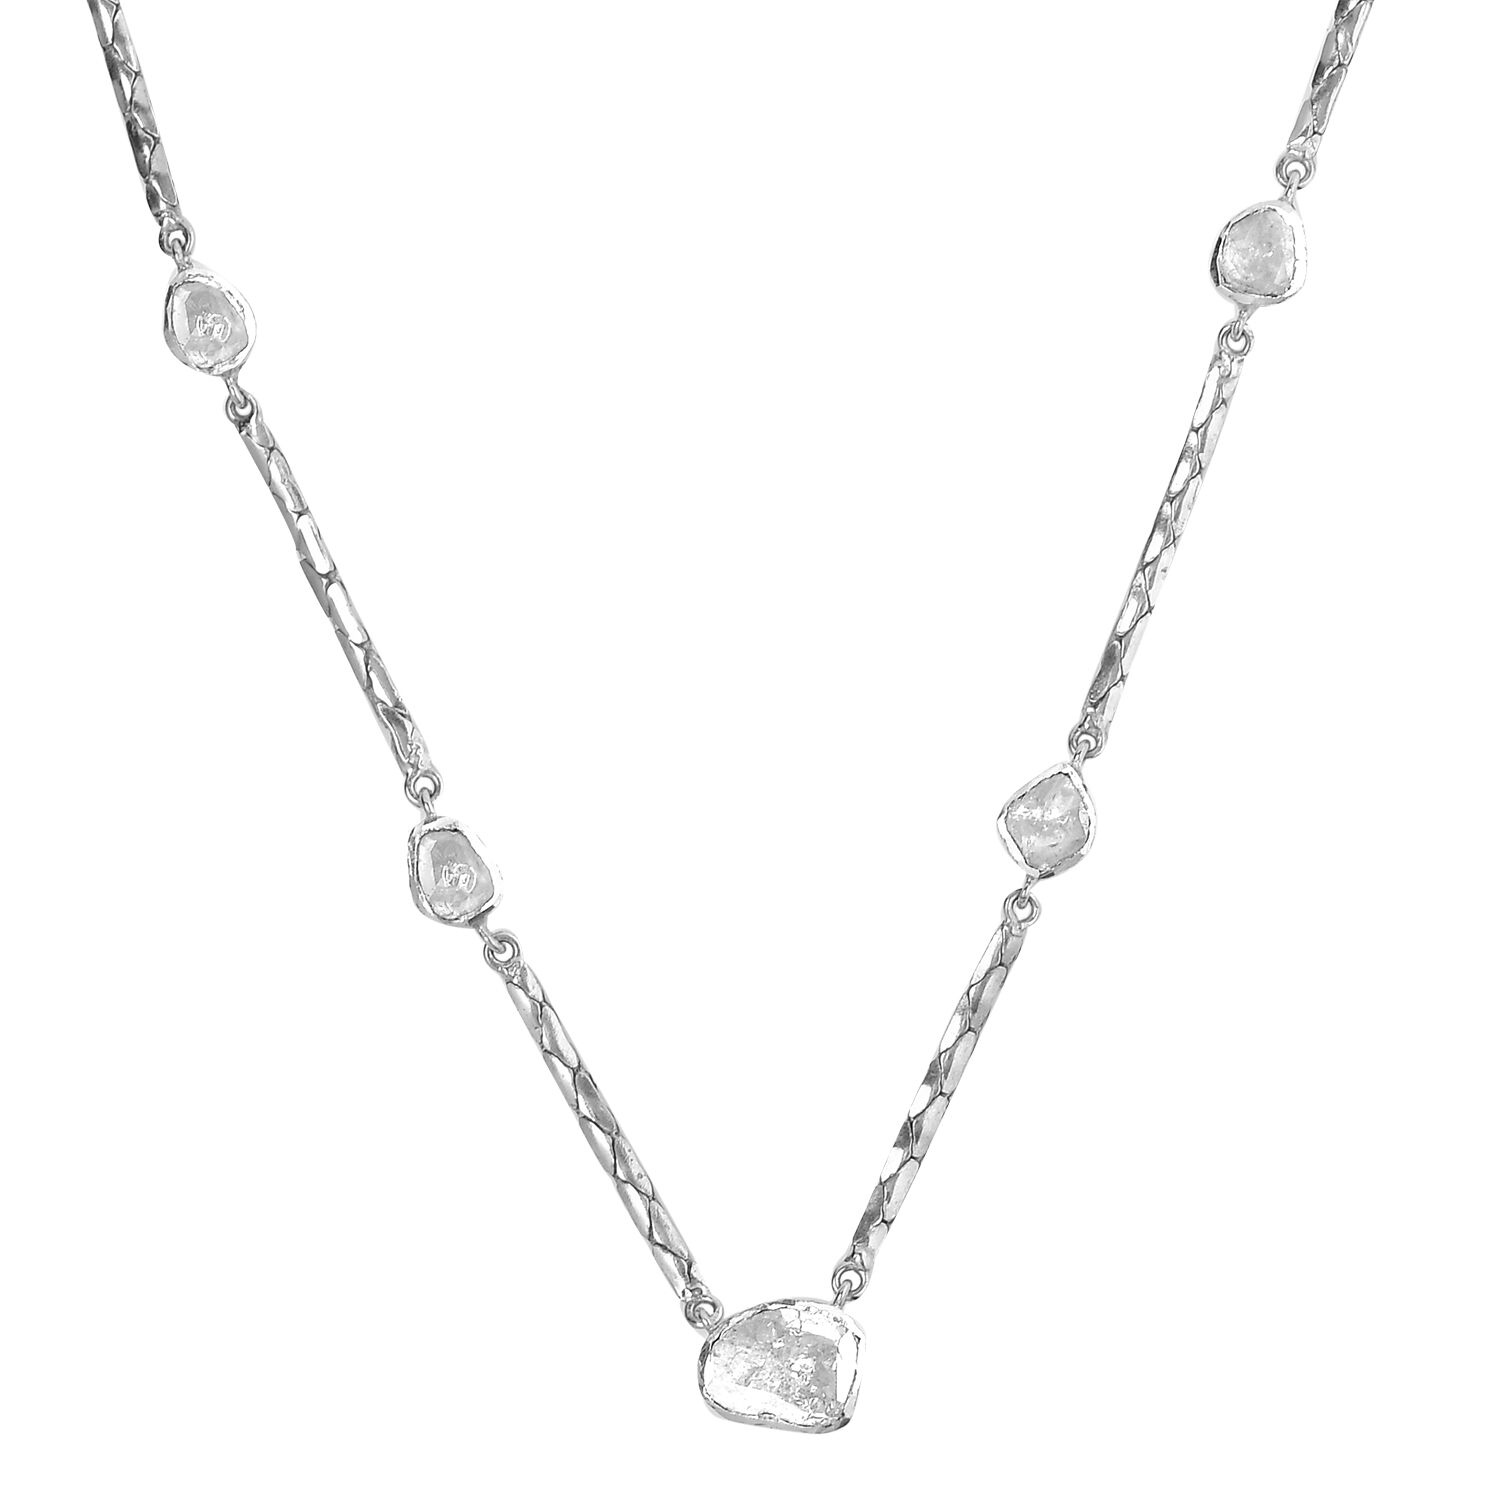 2 Extender 18 Sterling Silver Cushion Cut Pendant Necklace